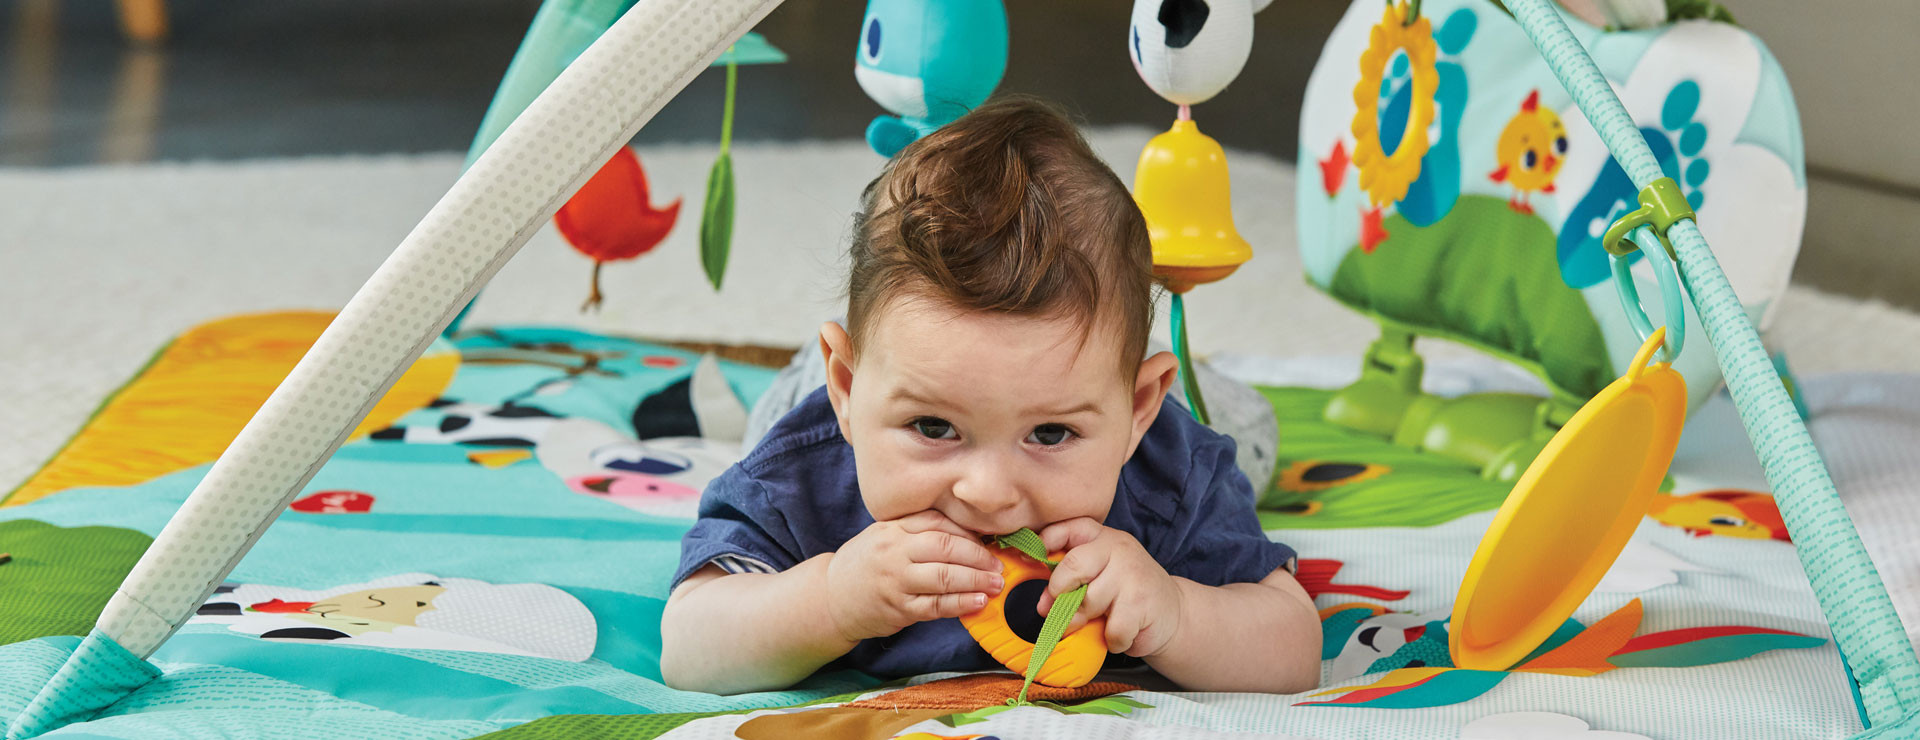 Carrot shape teether and other attached toys stimulate the senses 